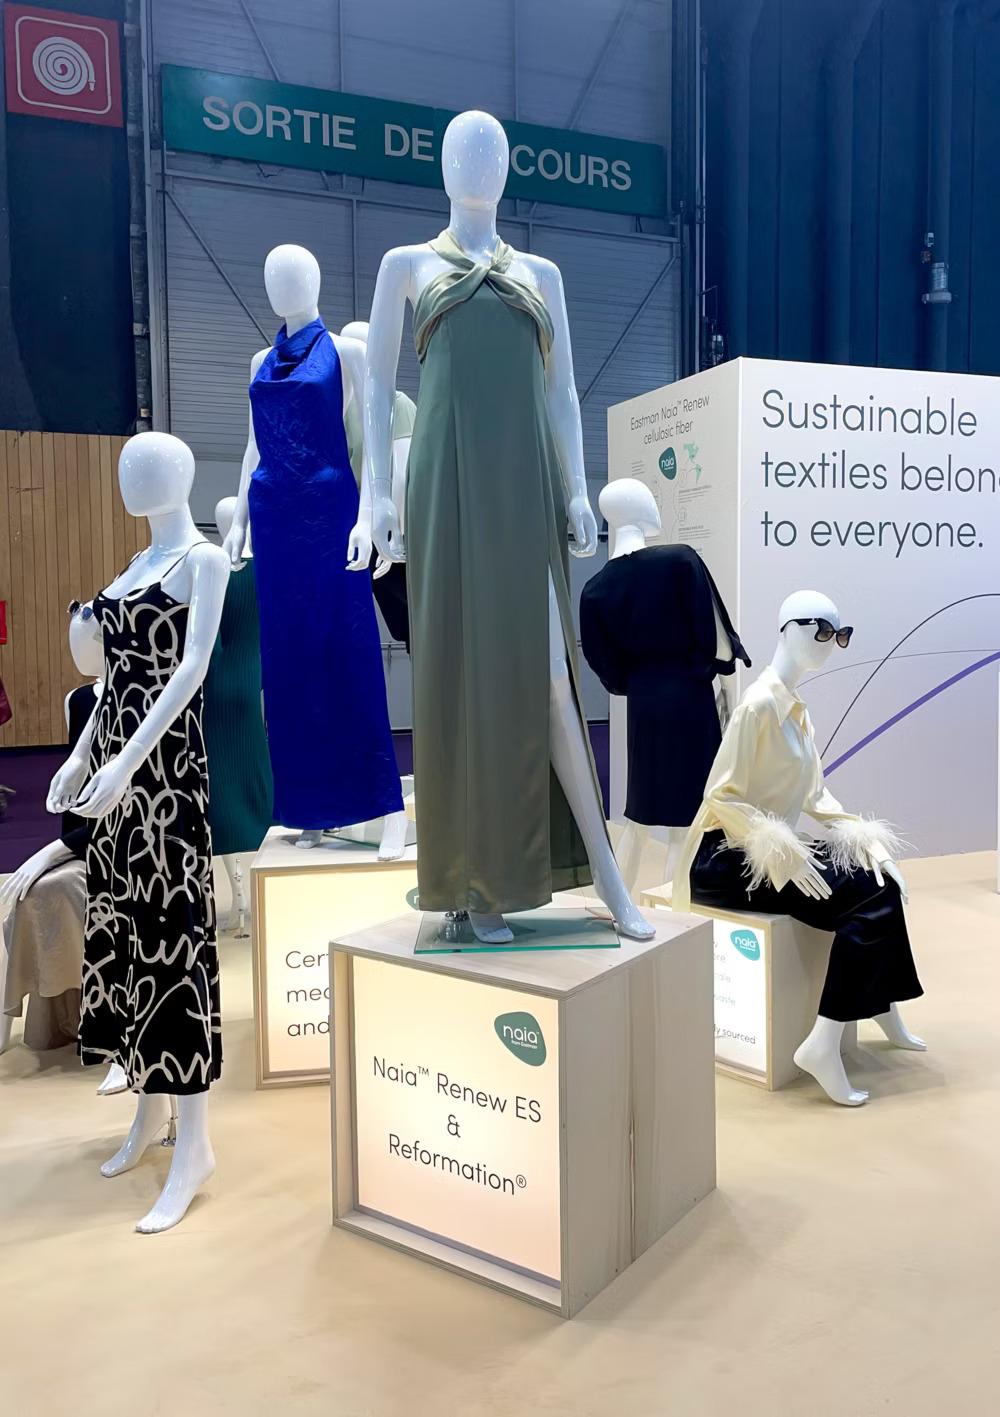 Manequins in different dresses. A display "Sustainable textiles belong to everyone." behind them.